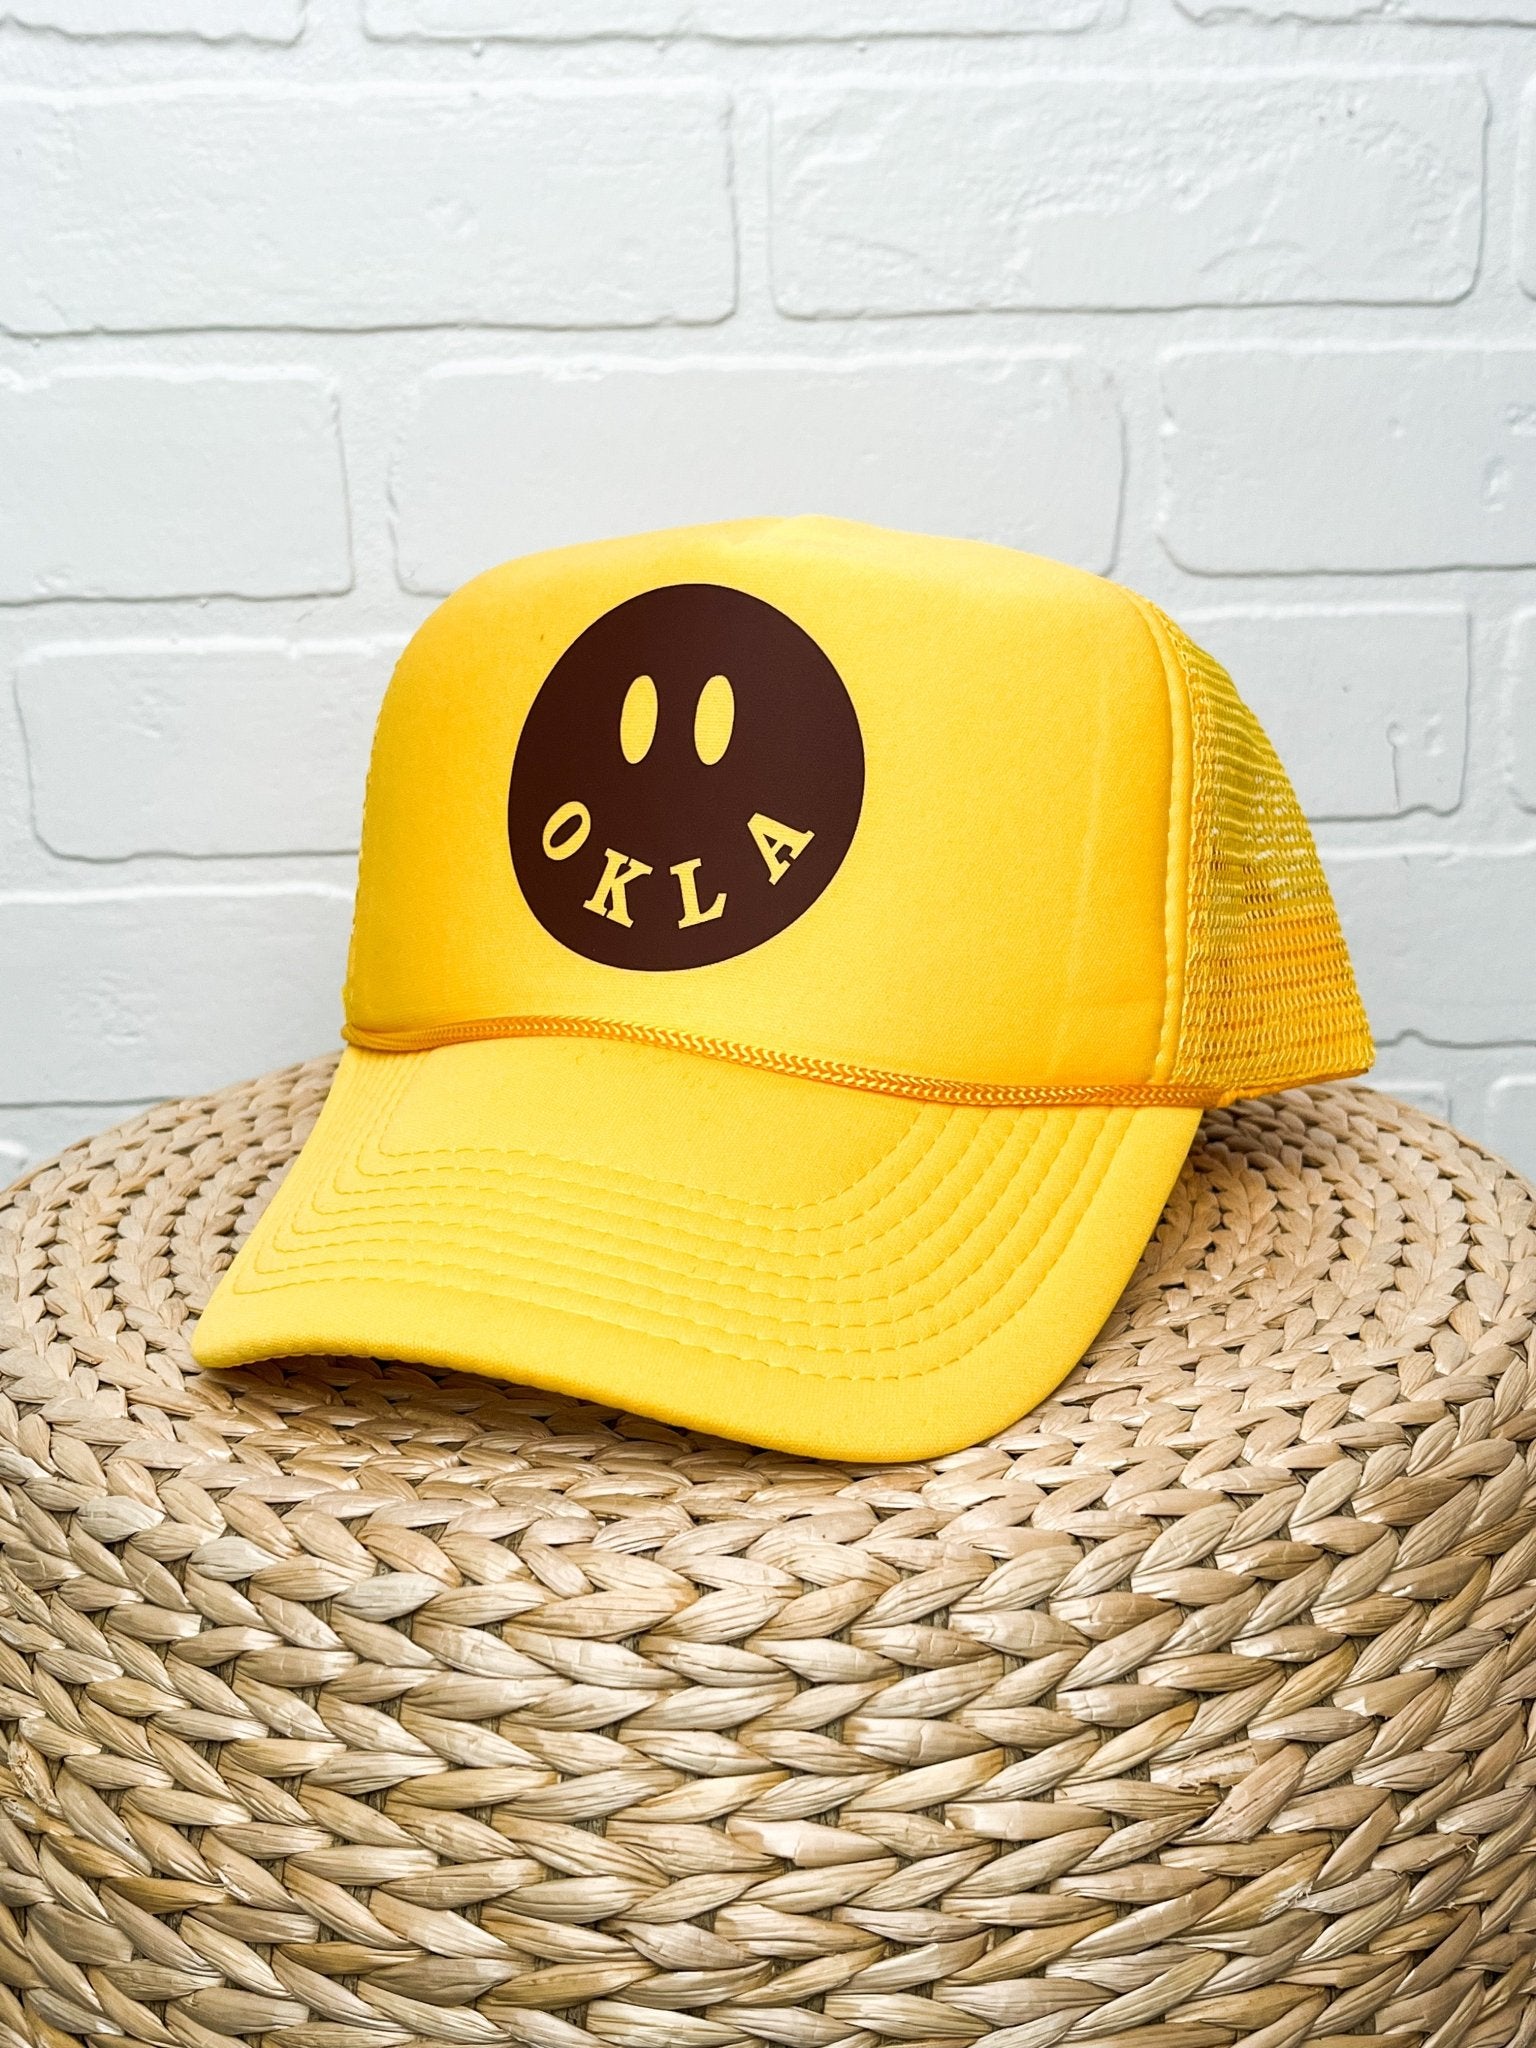 OKLA smiley trucker hat yellow - Trendy Hats at Lush Fashion Lounge Boutique in Oklahoma City